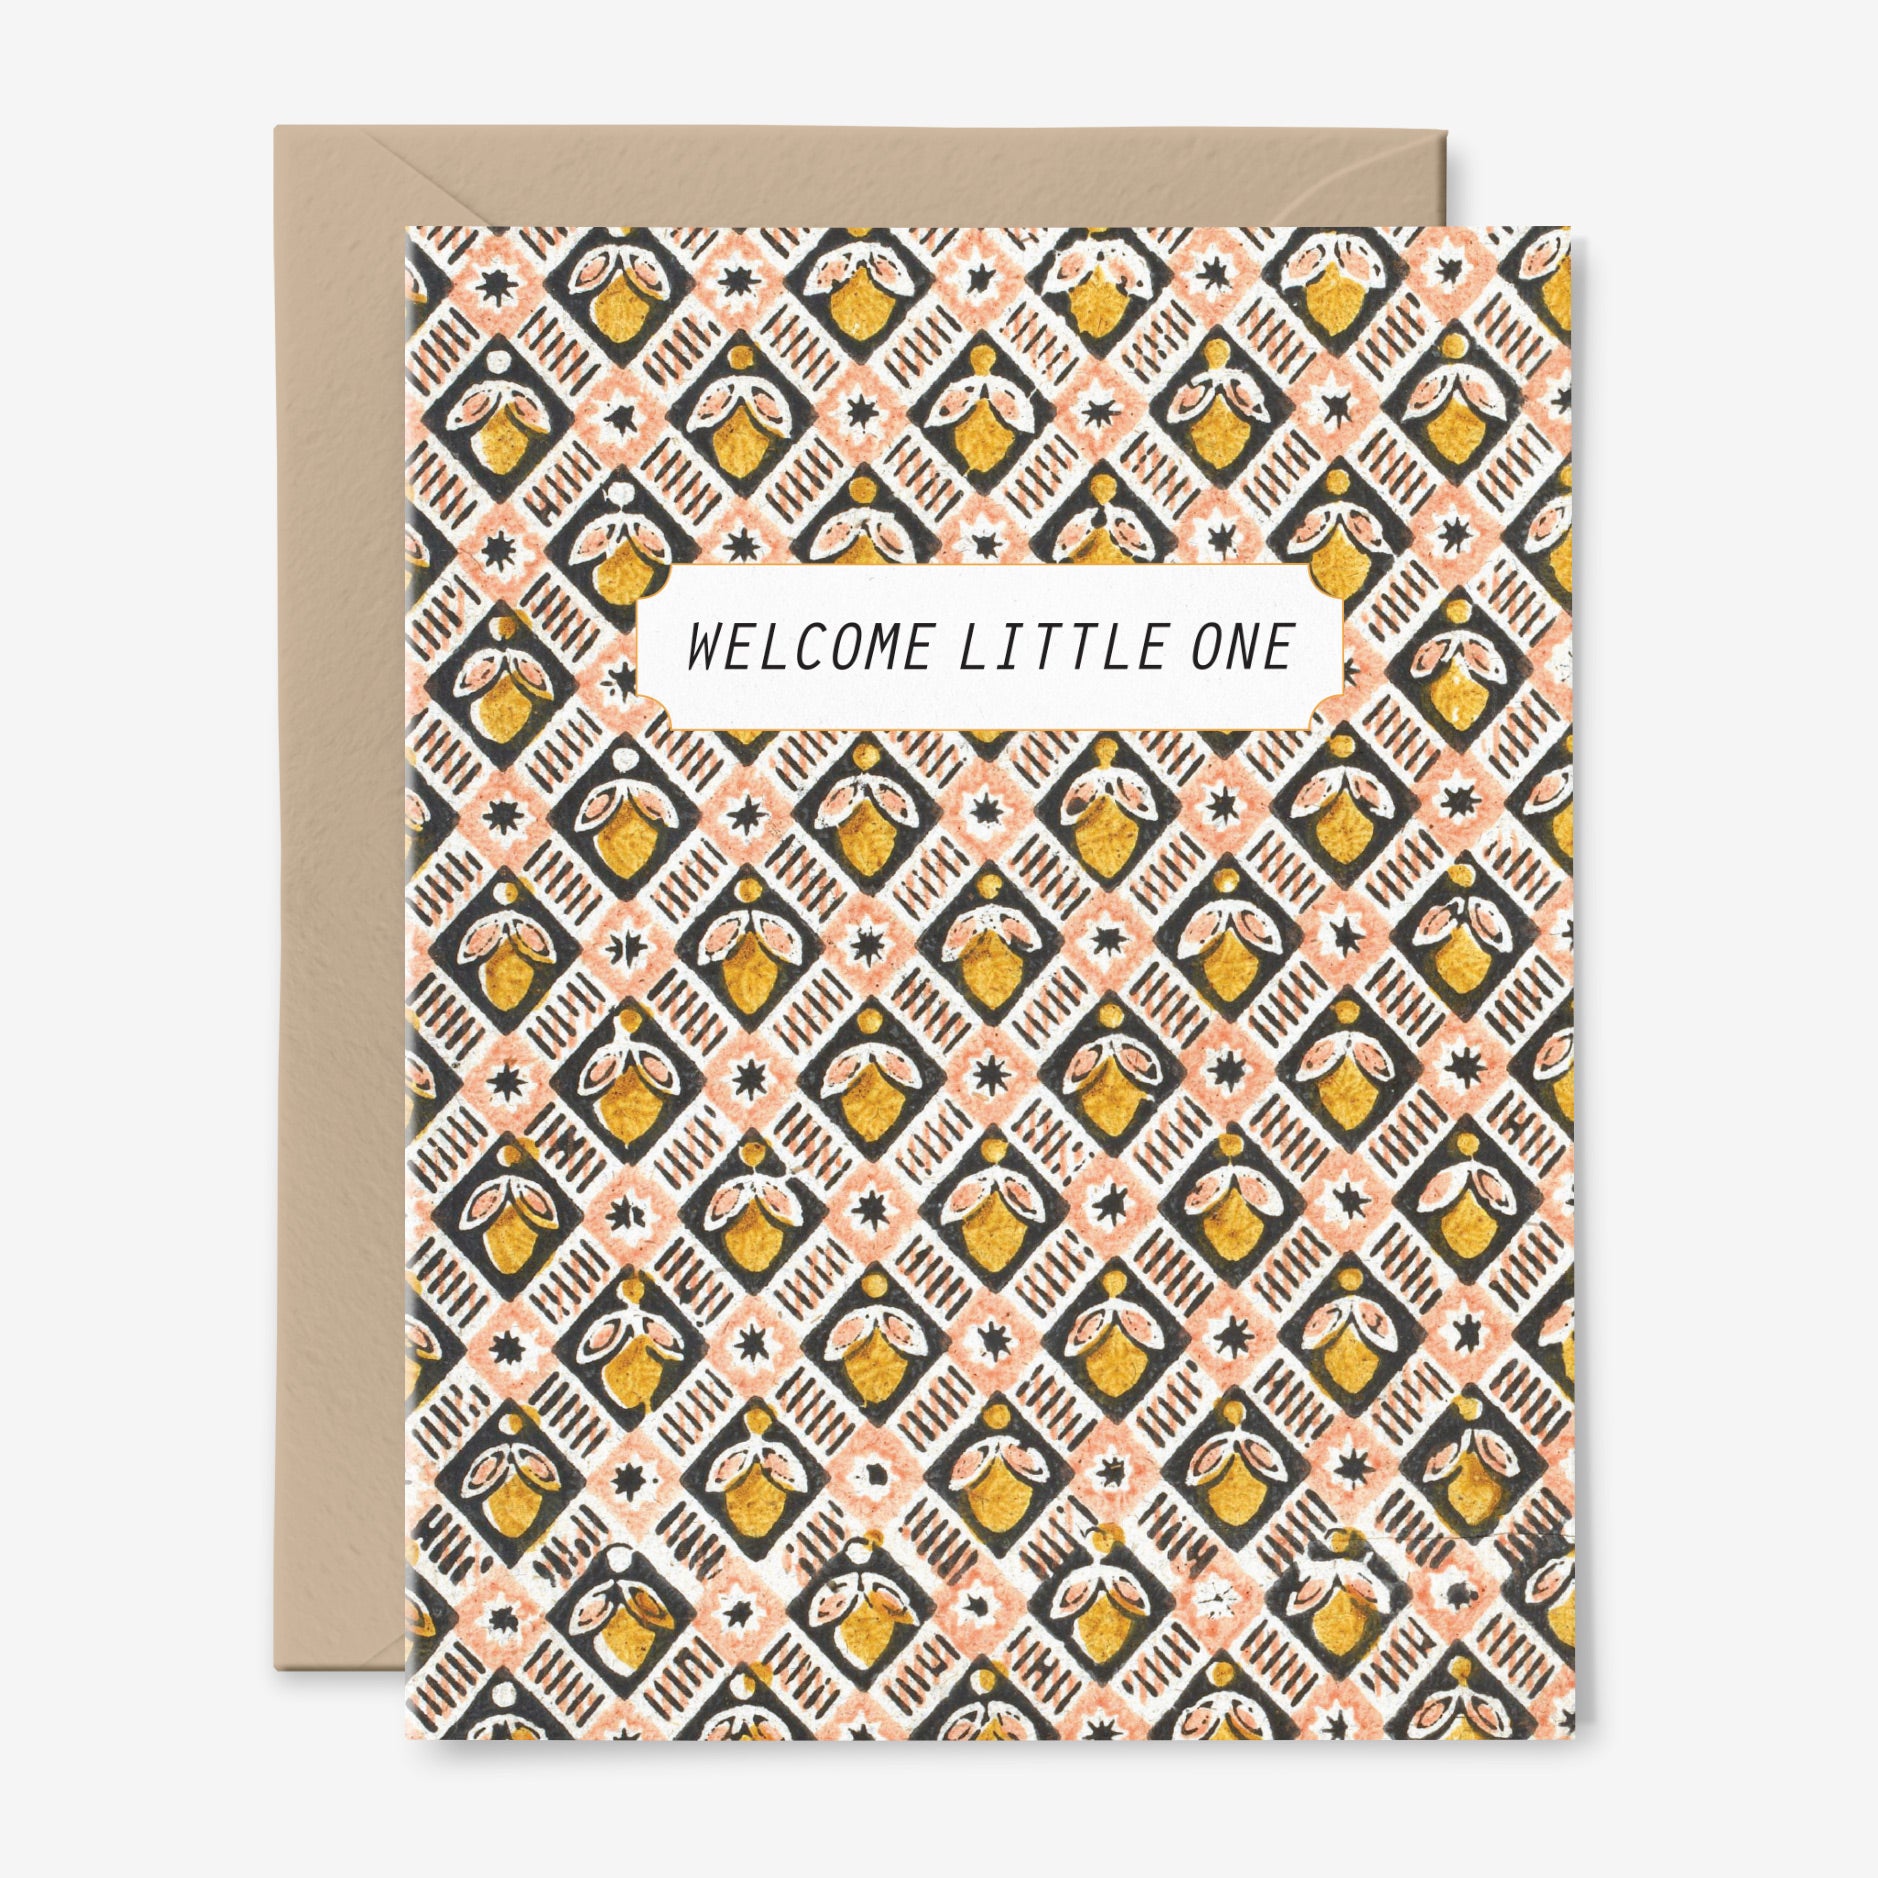 Welcome Little One Acorn Card